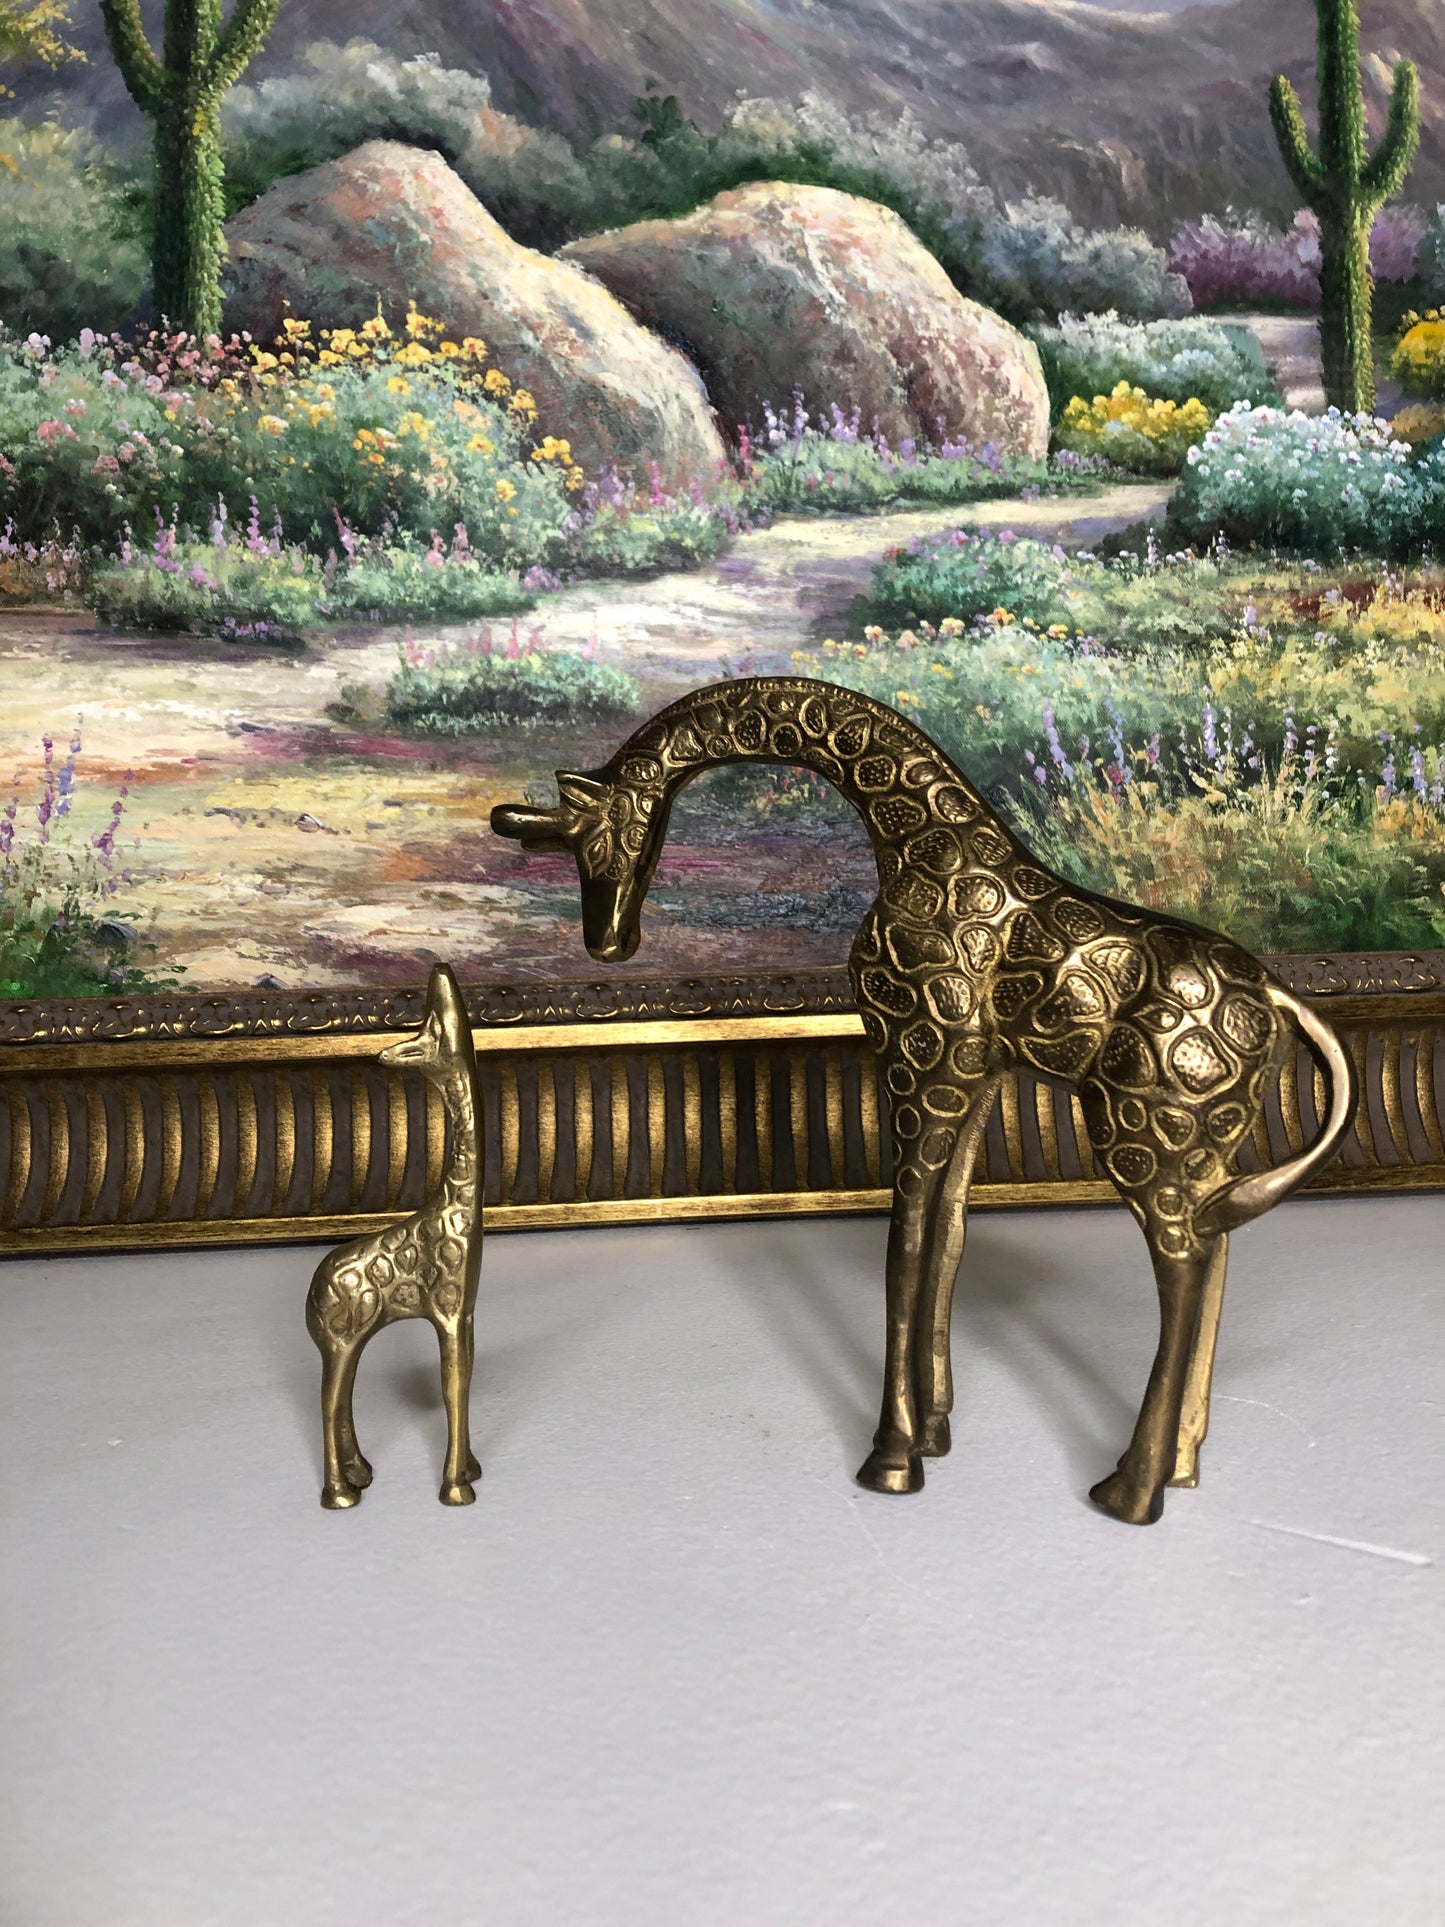 Sweetest brass mother and baby giraffe pair - Excellent condition!